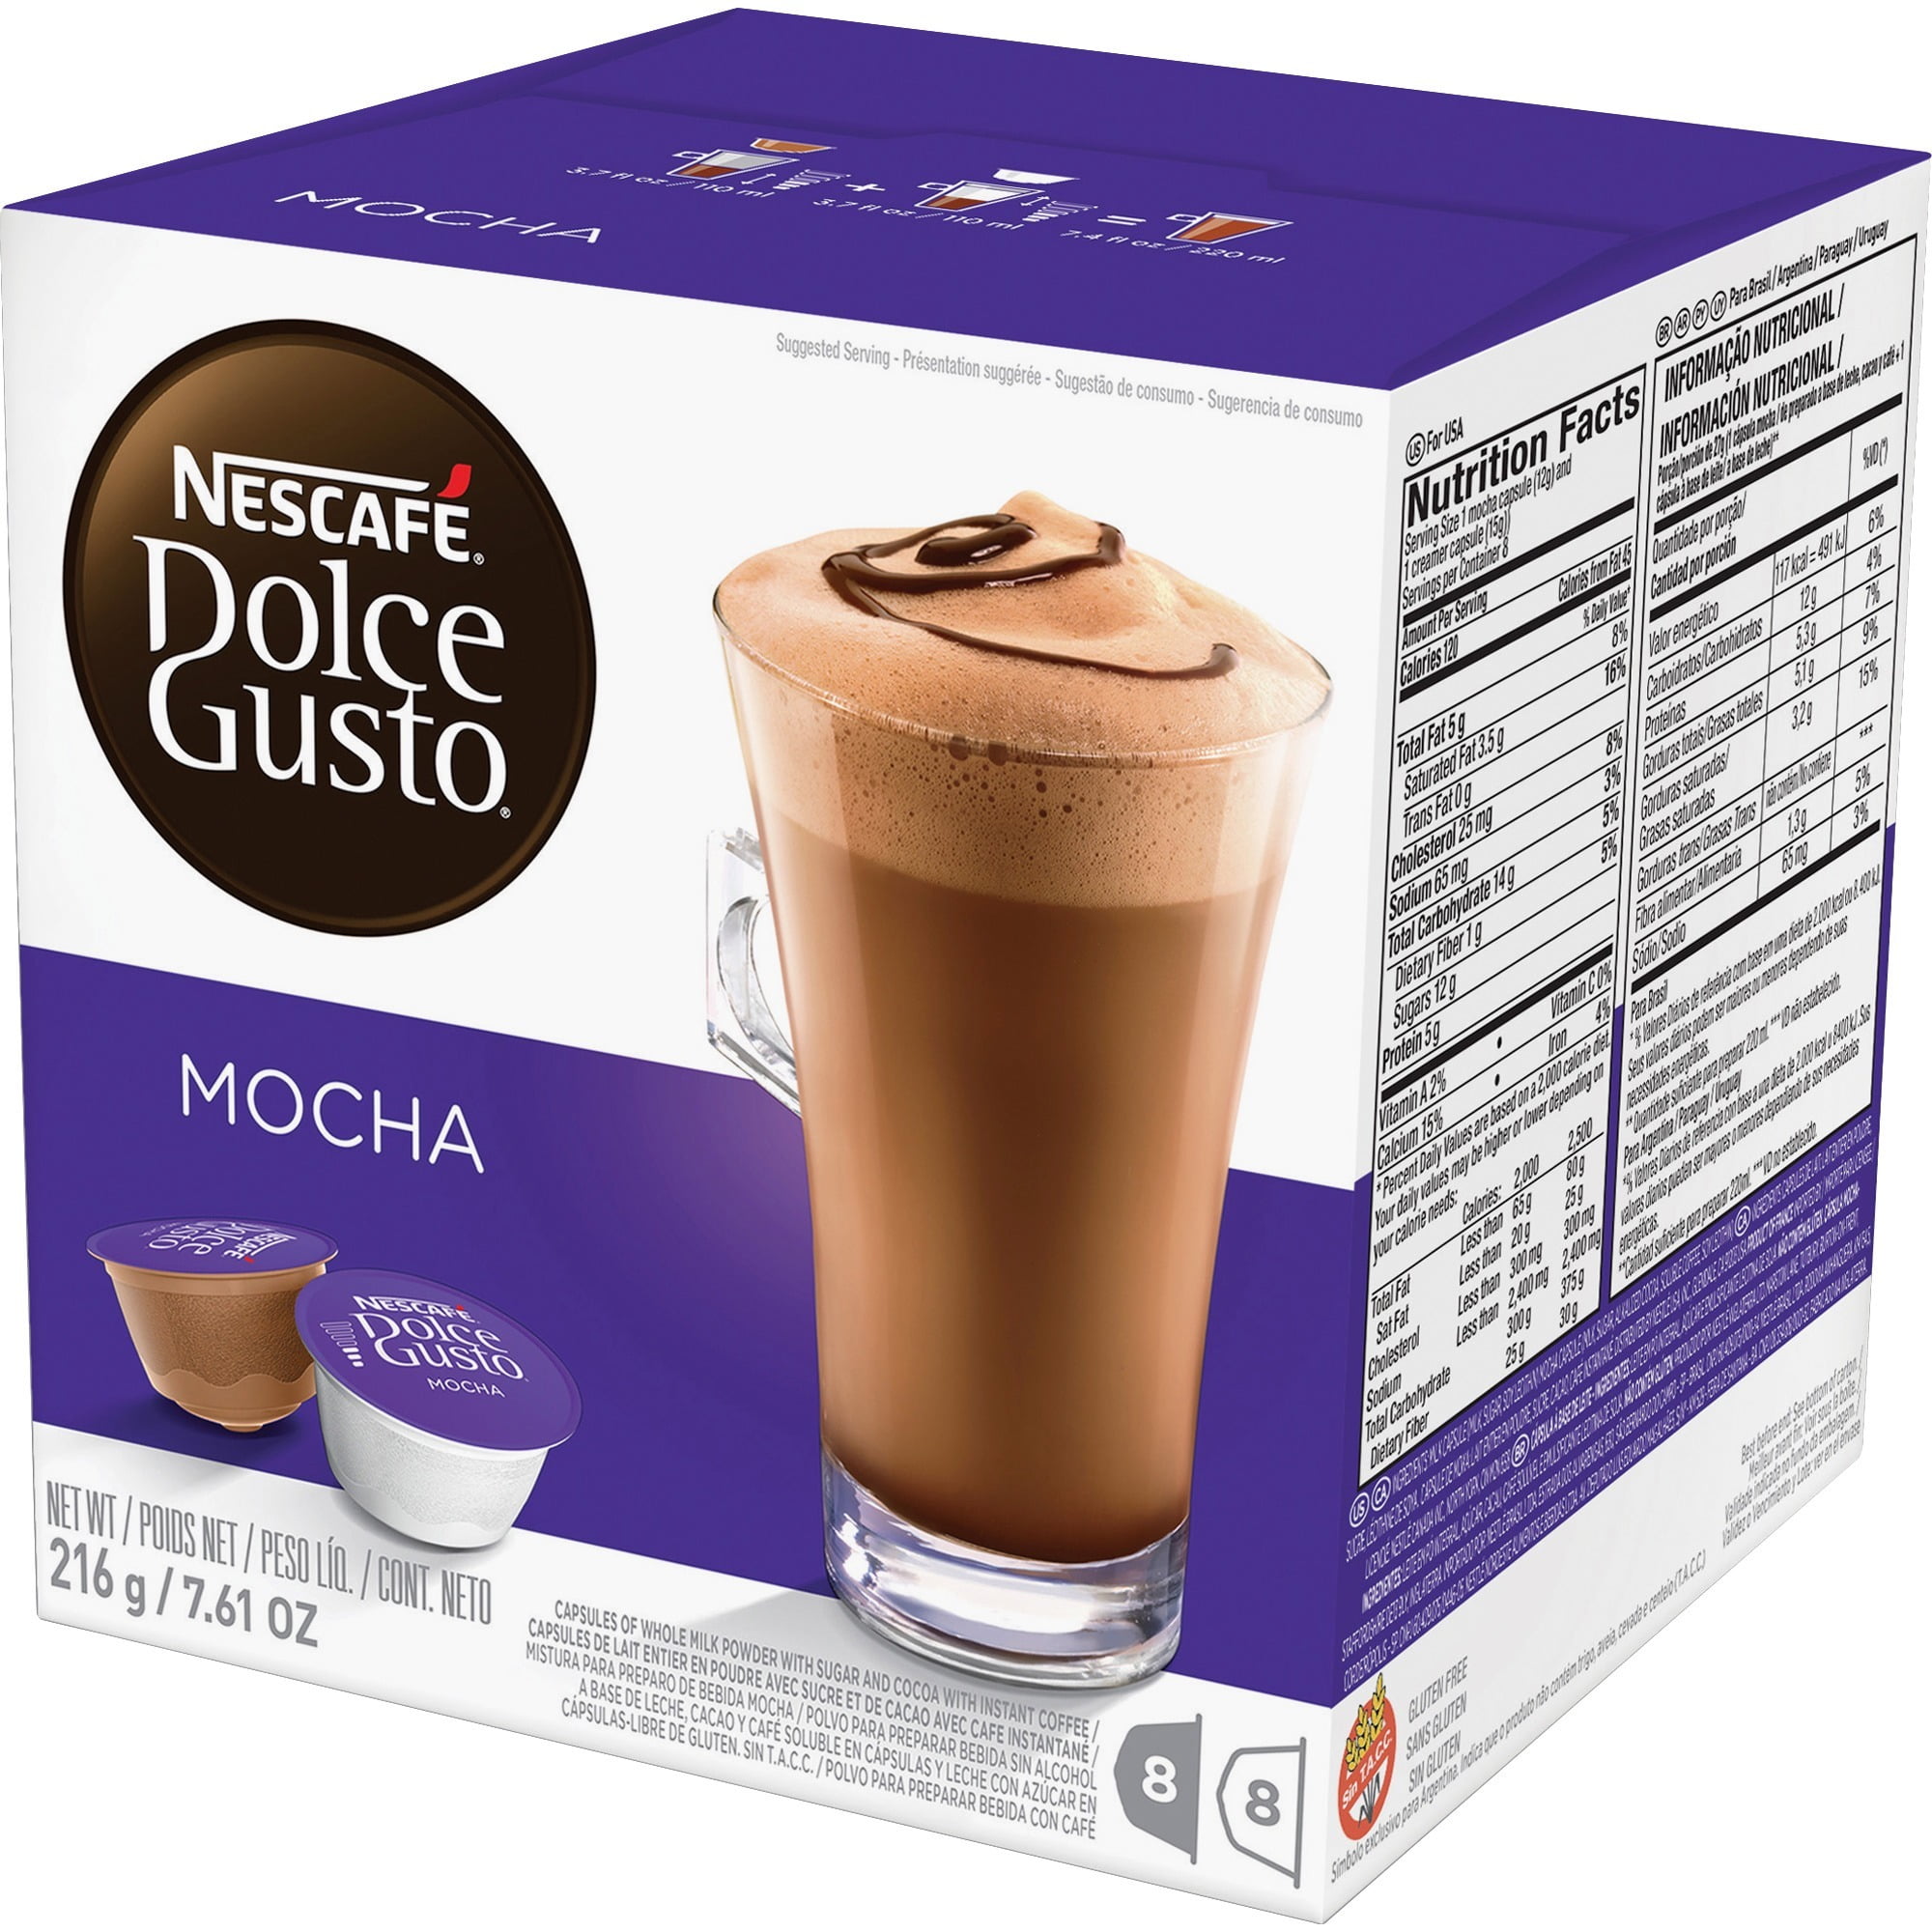  Nescafe Dolce Gusto Coffee Pods, Lungo Decaffeinato, 16  capsules, Pack of 3 : Grocery & Gourmet Food